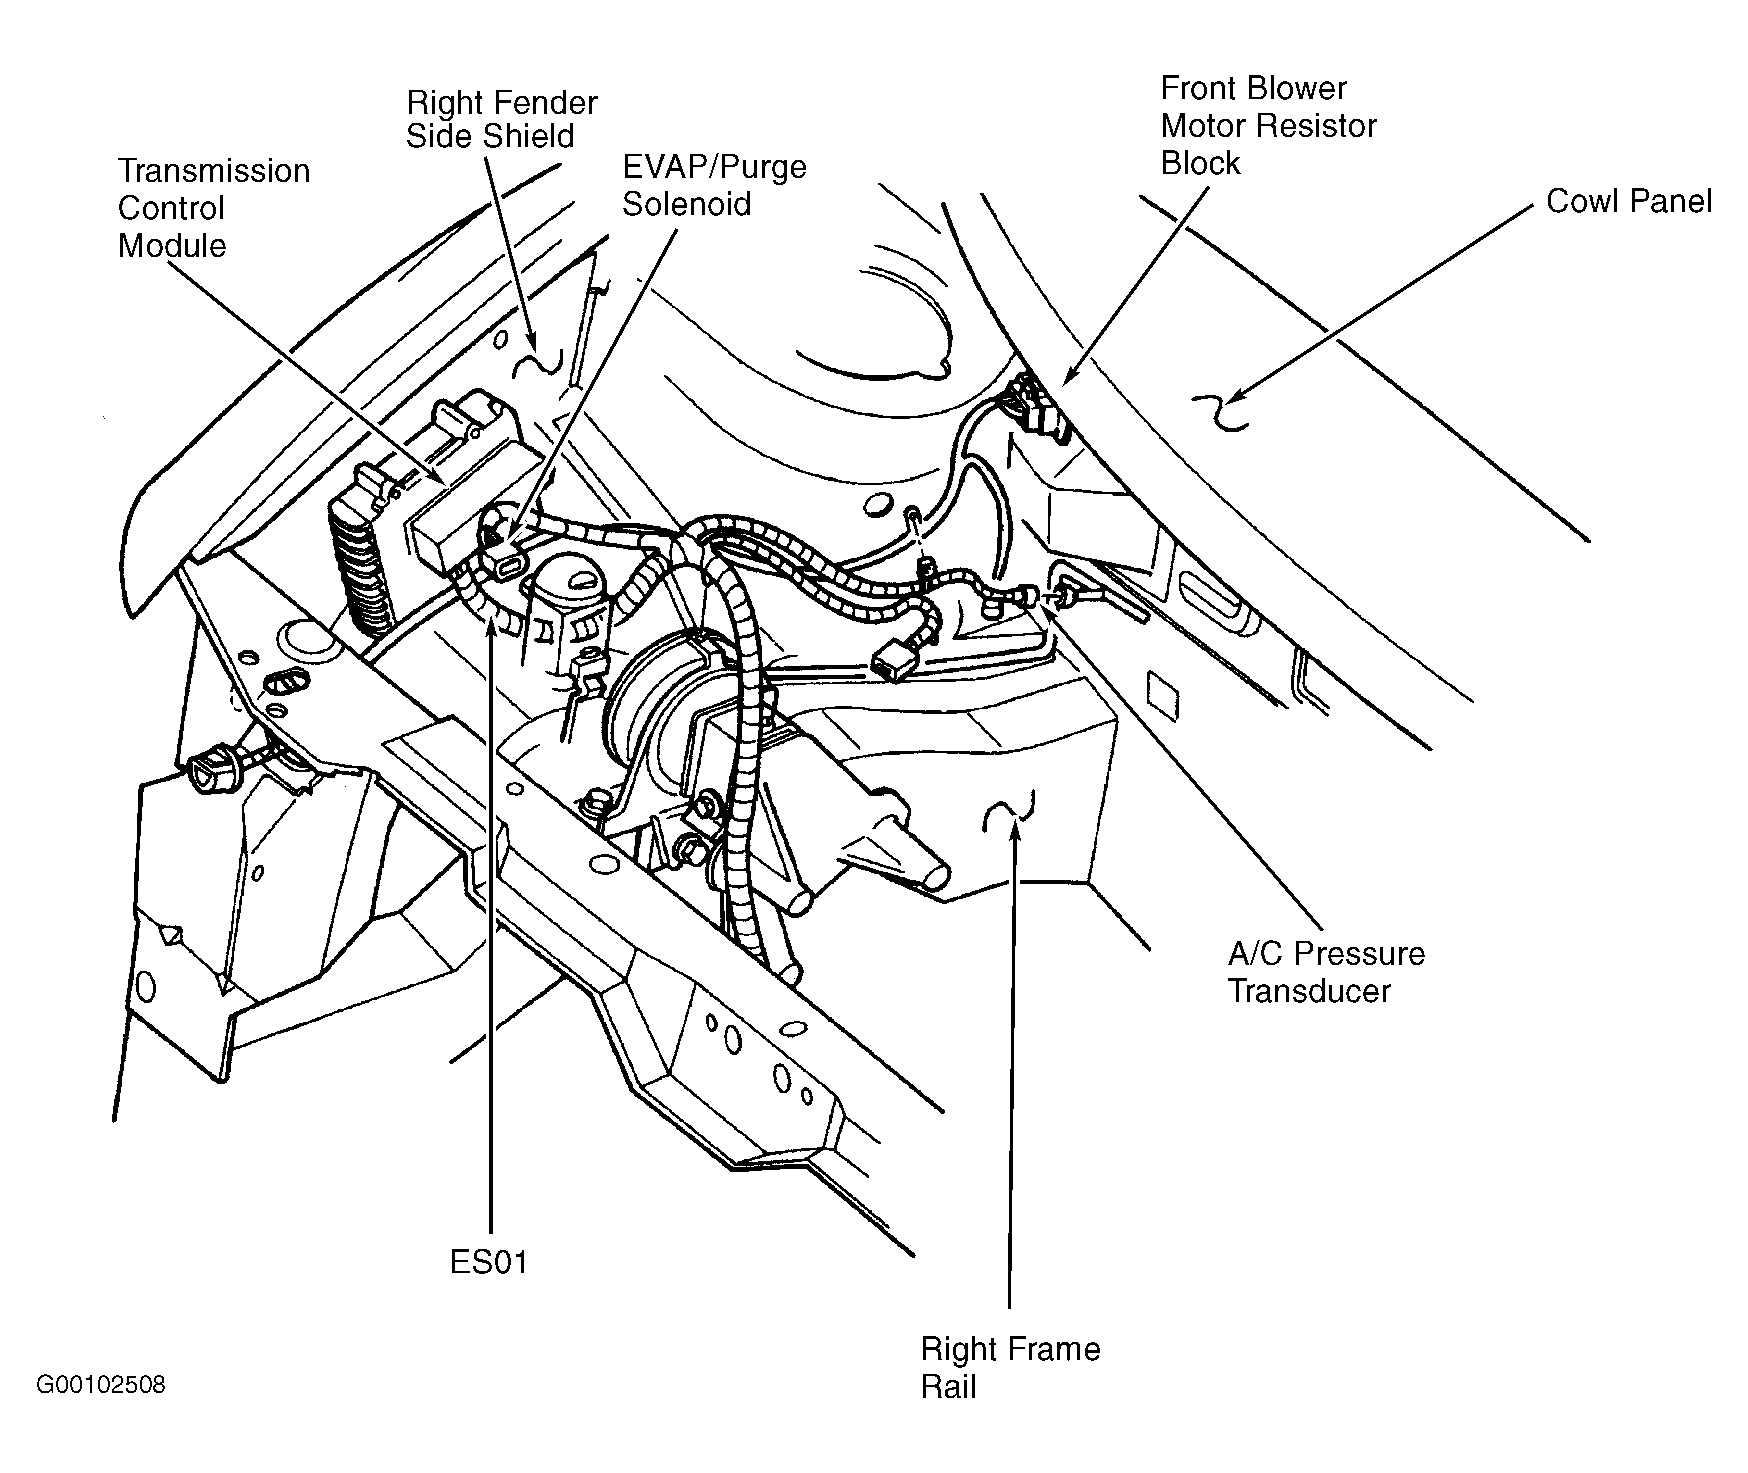 Dodge Grand Caravan SE 1998 - Component Locations -  Right Side Of Engine Compartment